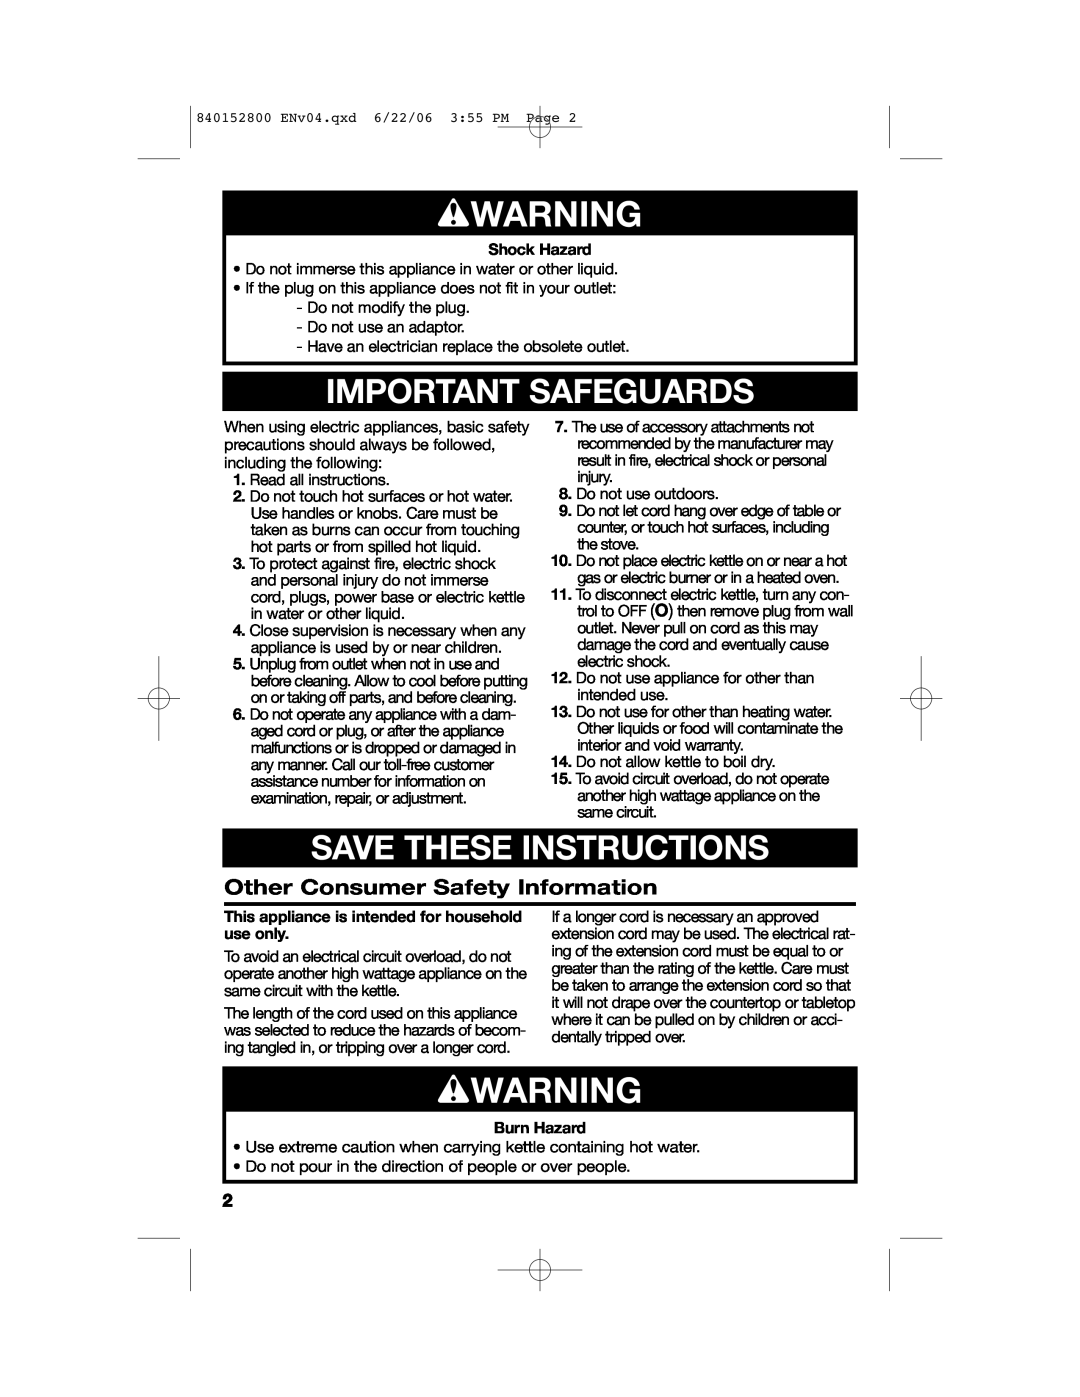 Hamilton Beach 40890 K14 manual wWARNING, Important Safeguards, Save These Instructions, Other Consumer Safety Information 